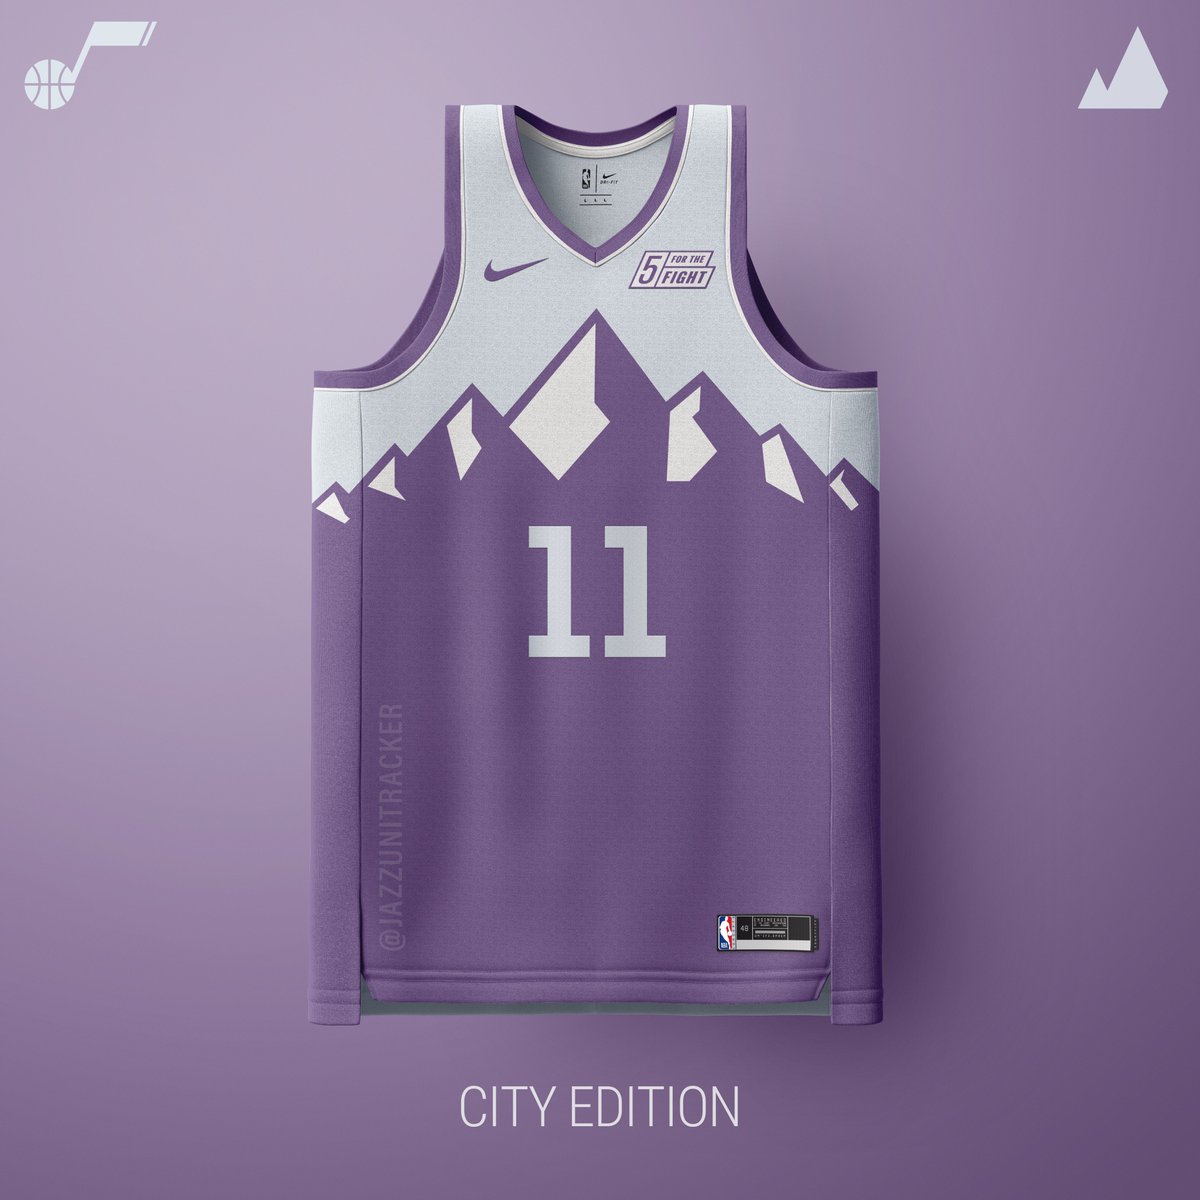 From @jazzunitracker on Twitter. Supposed leaks for next year's statement  jersey. Don't shoot the messenger. : r/UtahJazz